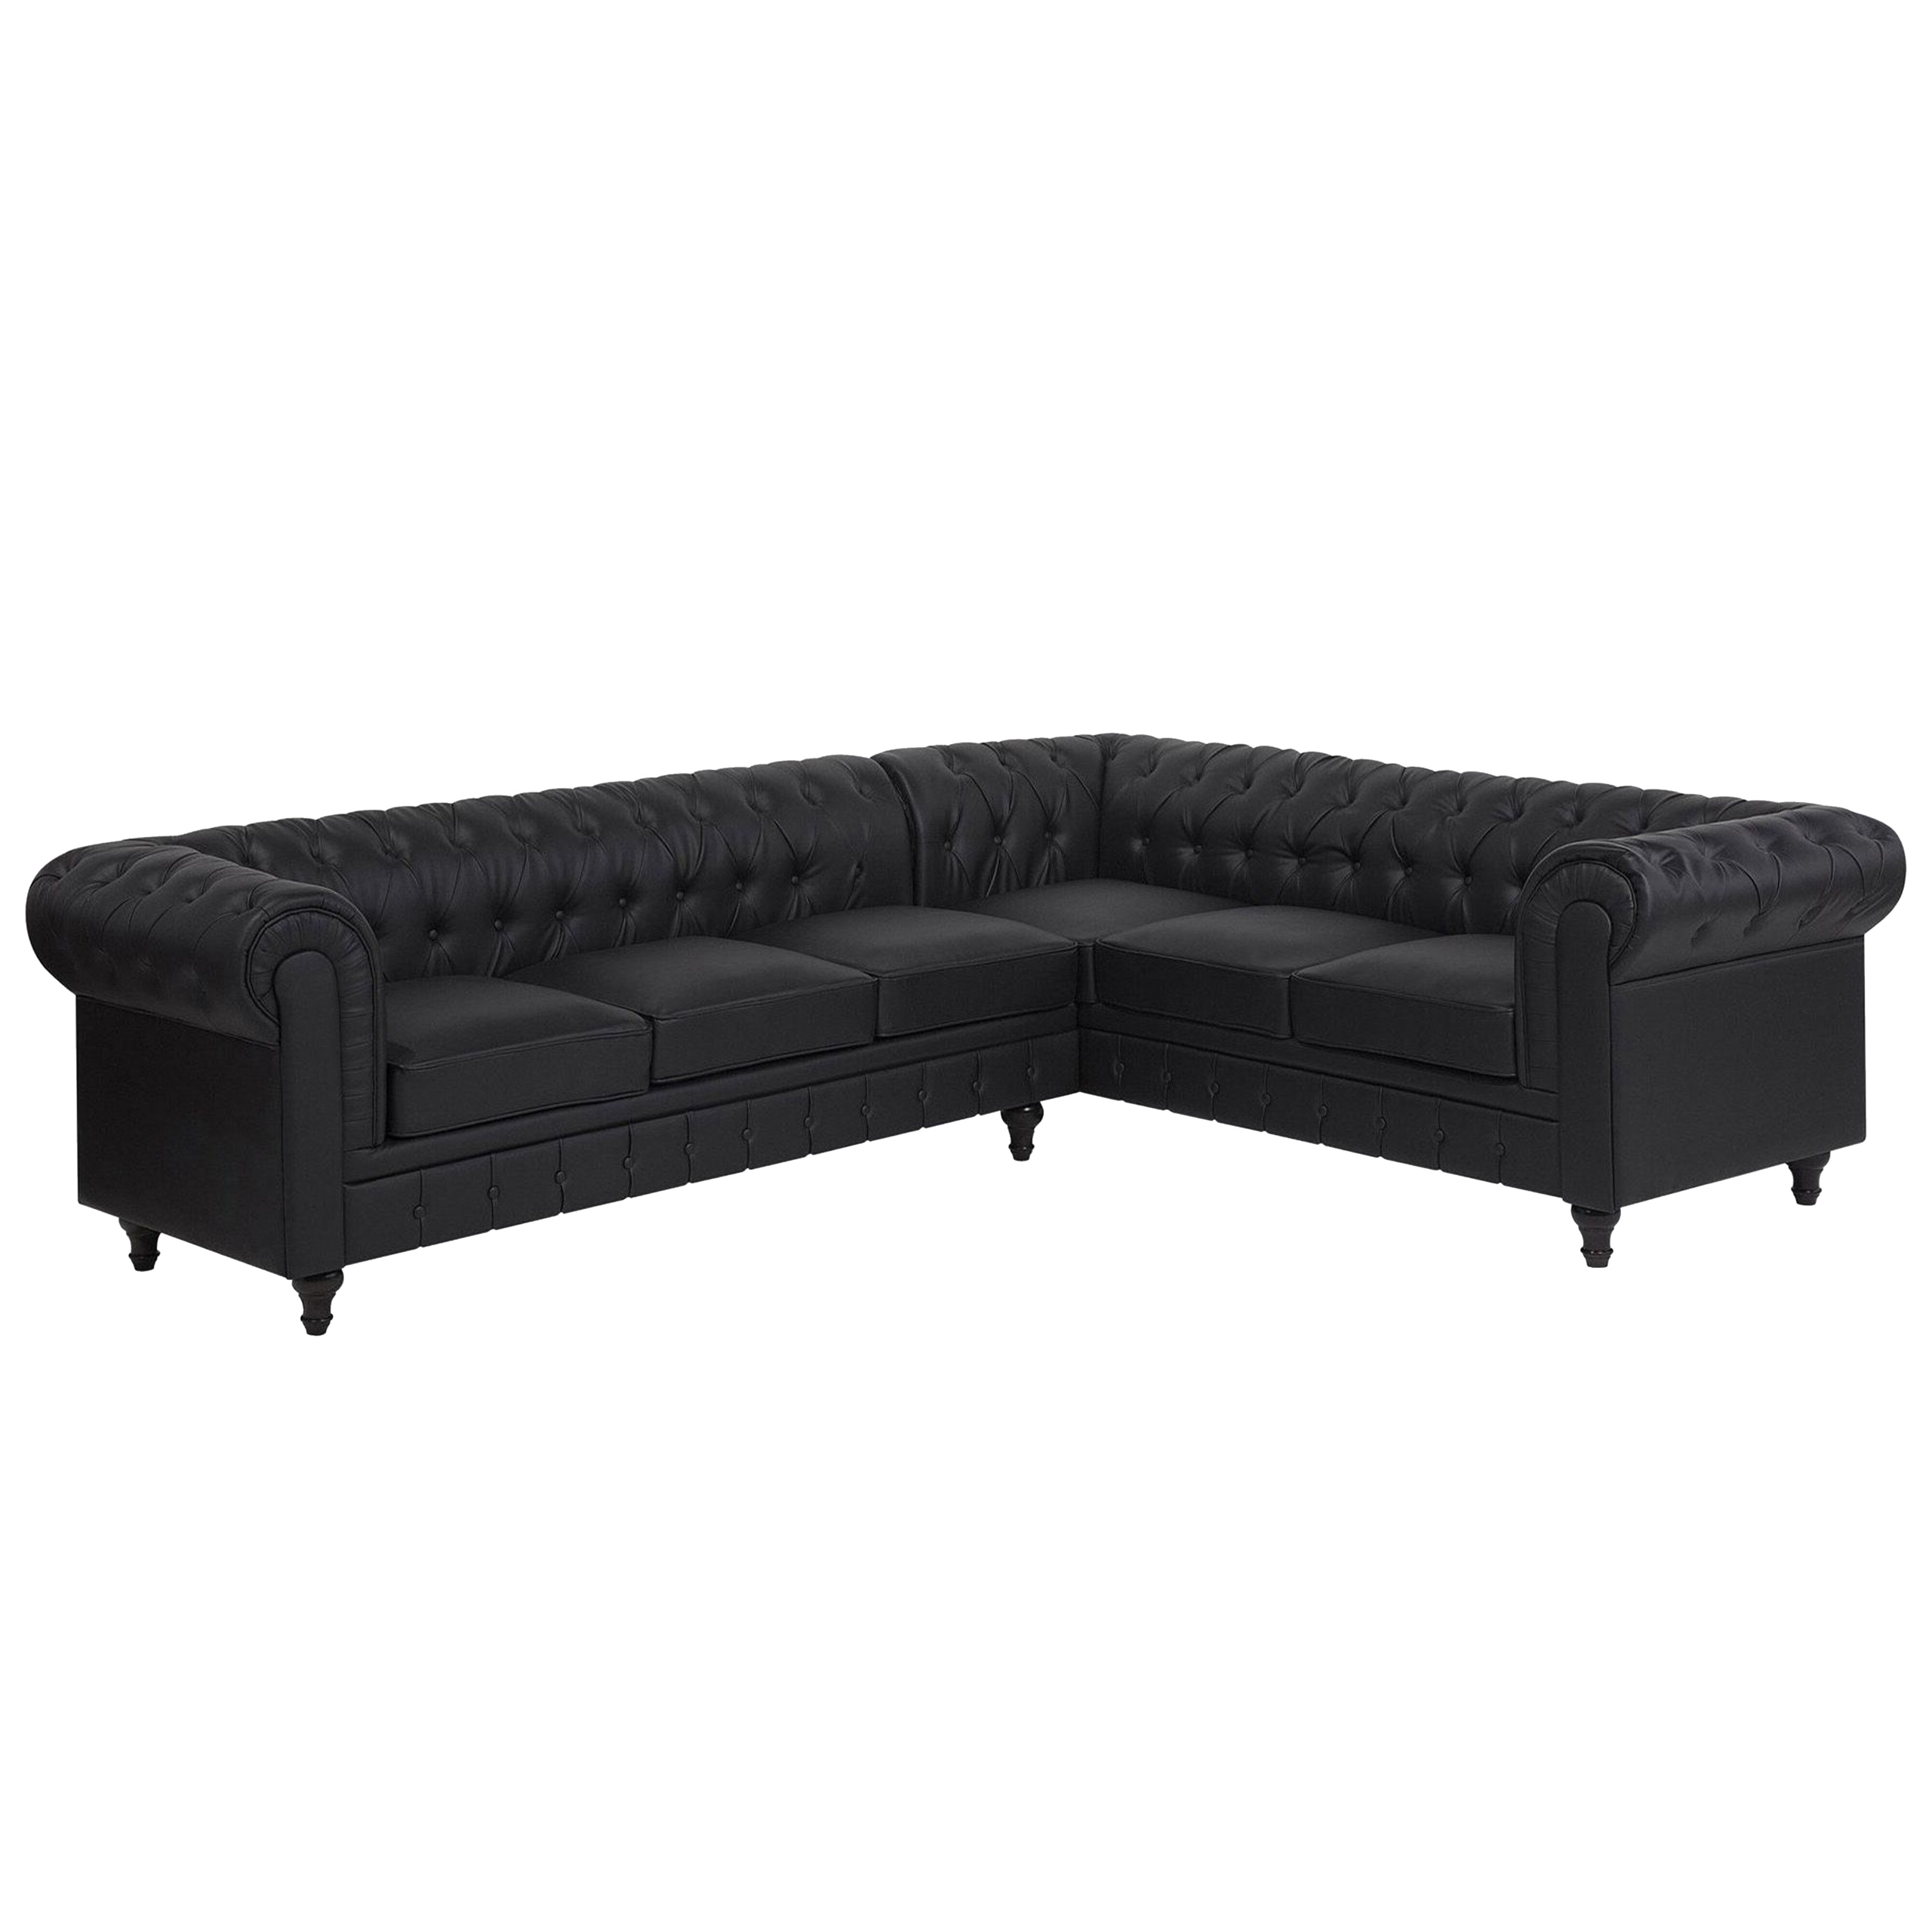 Beliani Chesterfield Left Hand Corner Sofa Black Faux Leather Upholstery Dark Wood Legs Chaise 6 Seater Contemporary